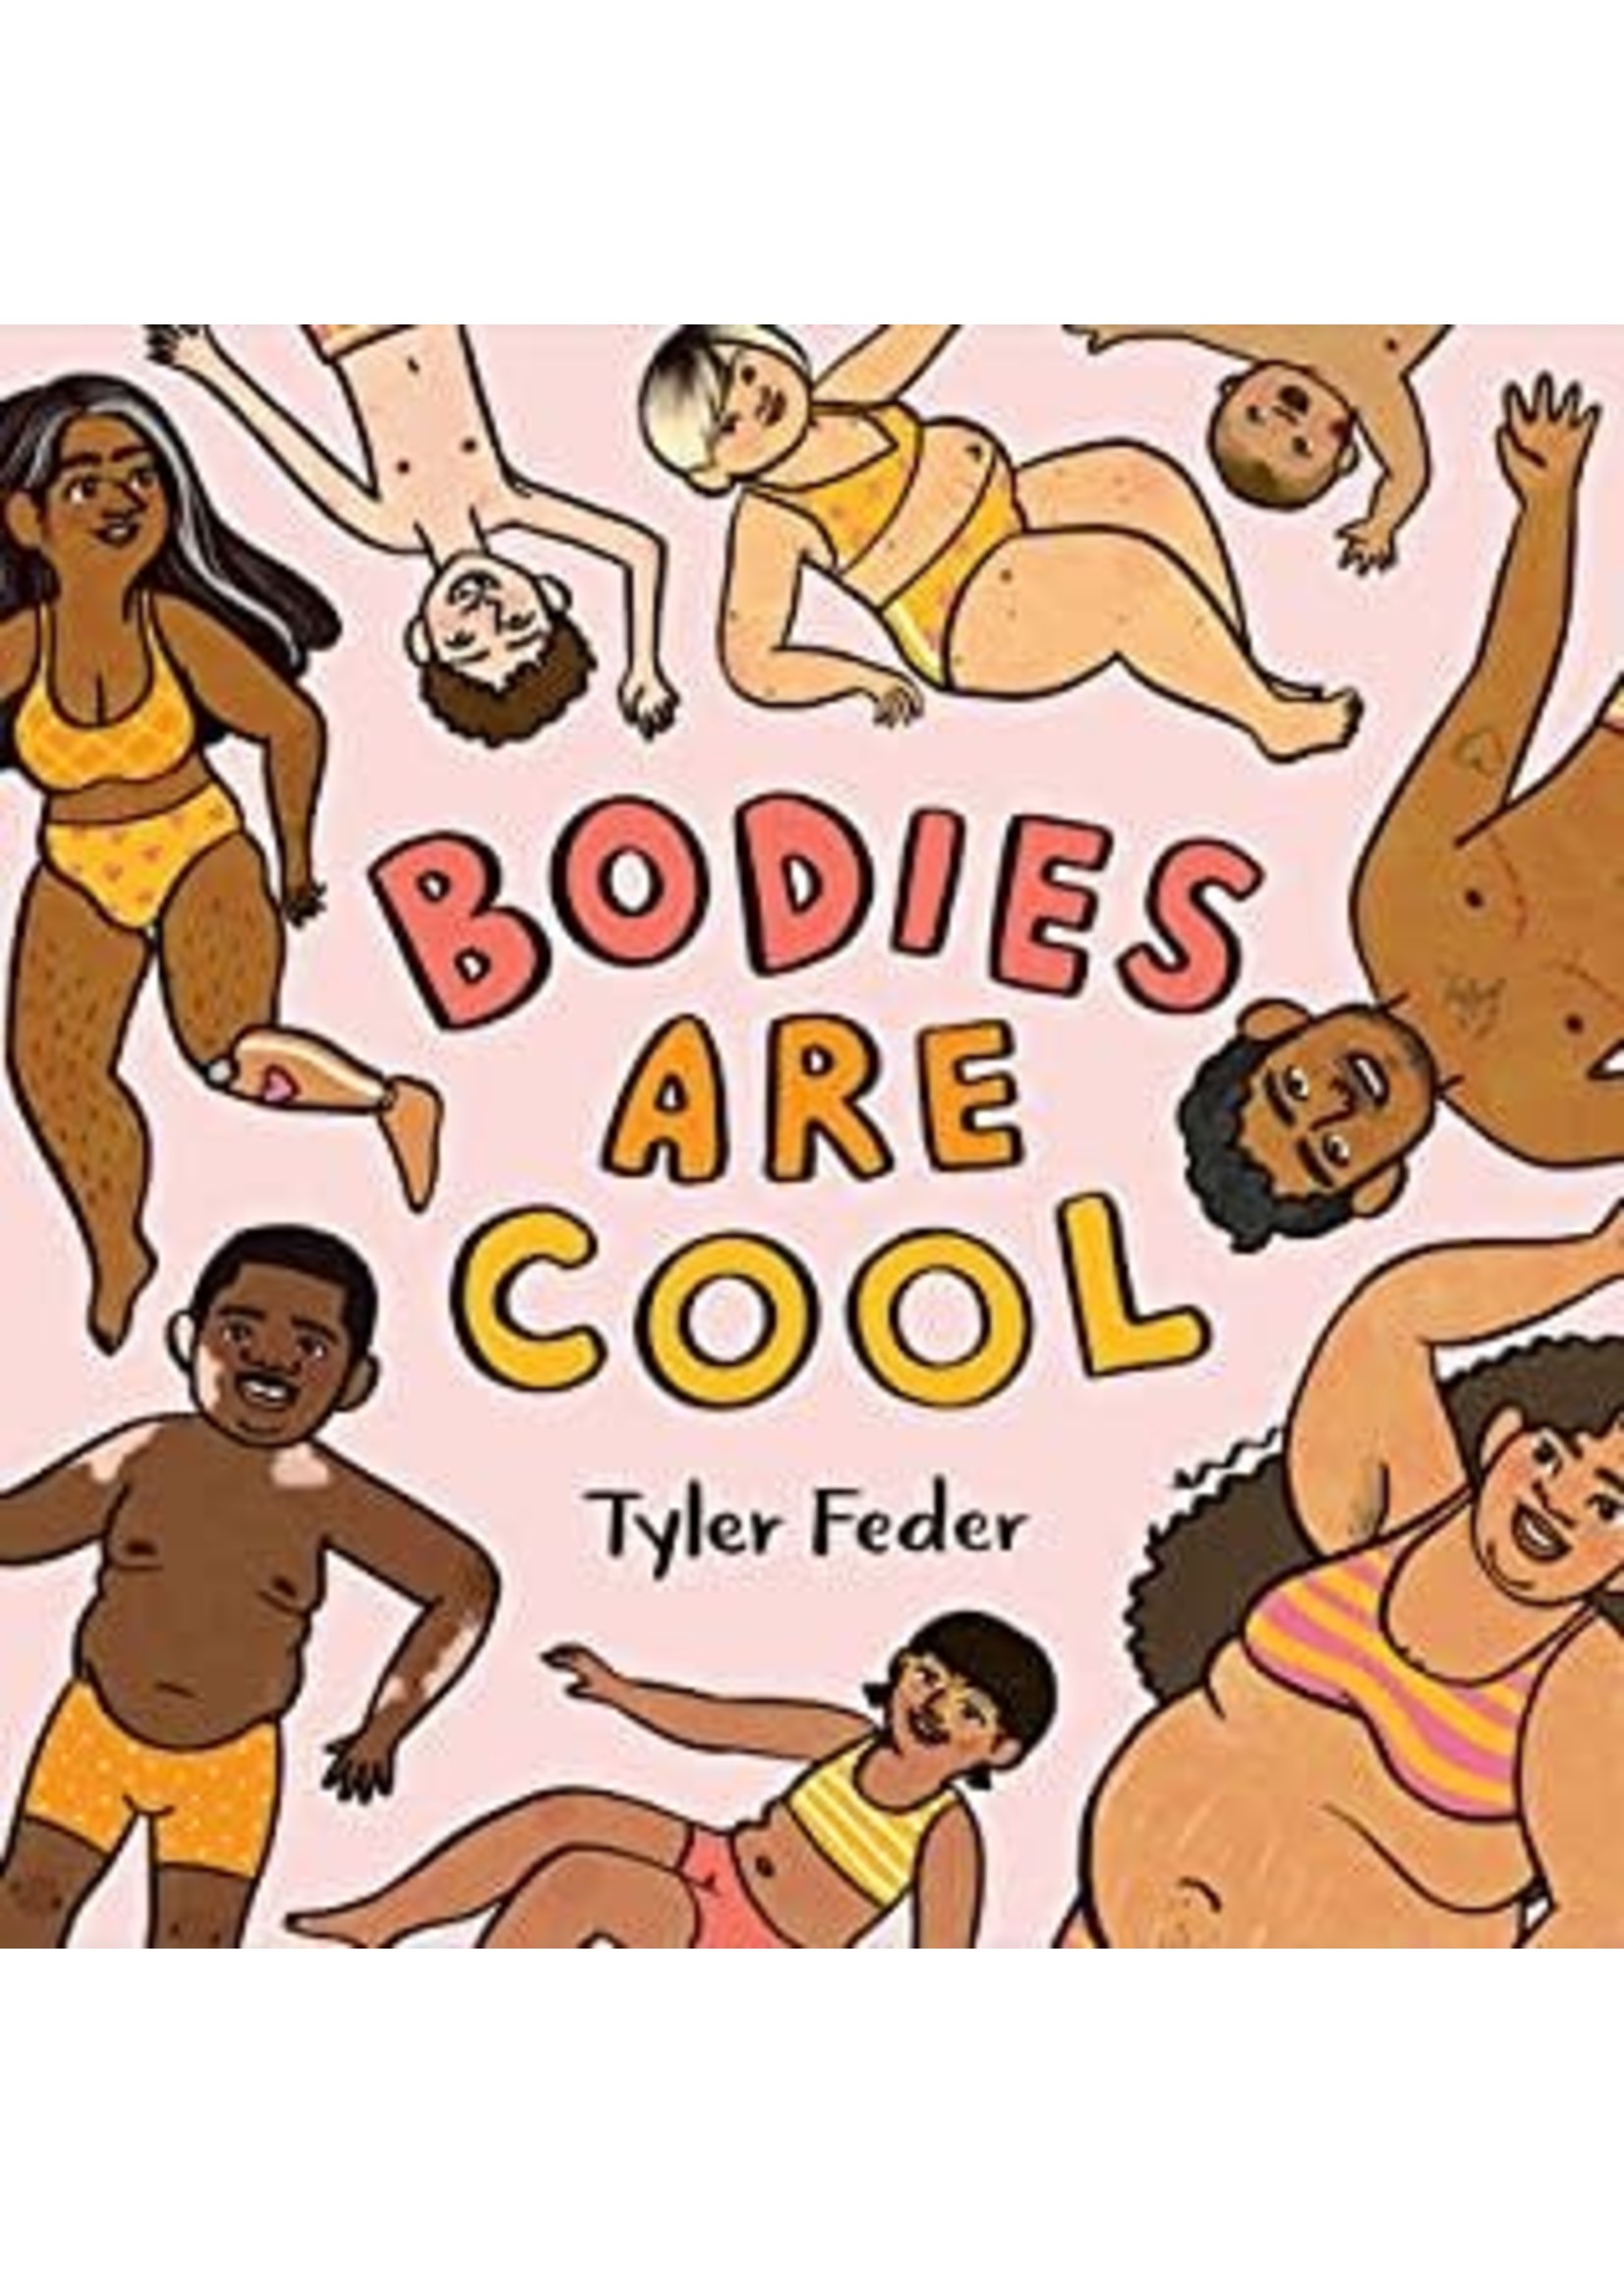 Bodies Are Cool by Tyler Feder